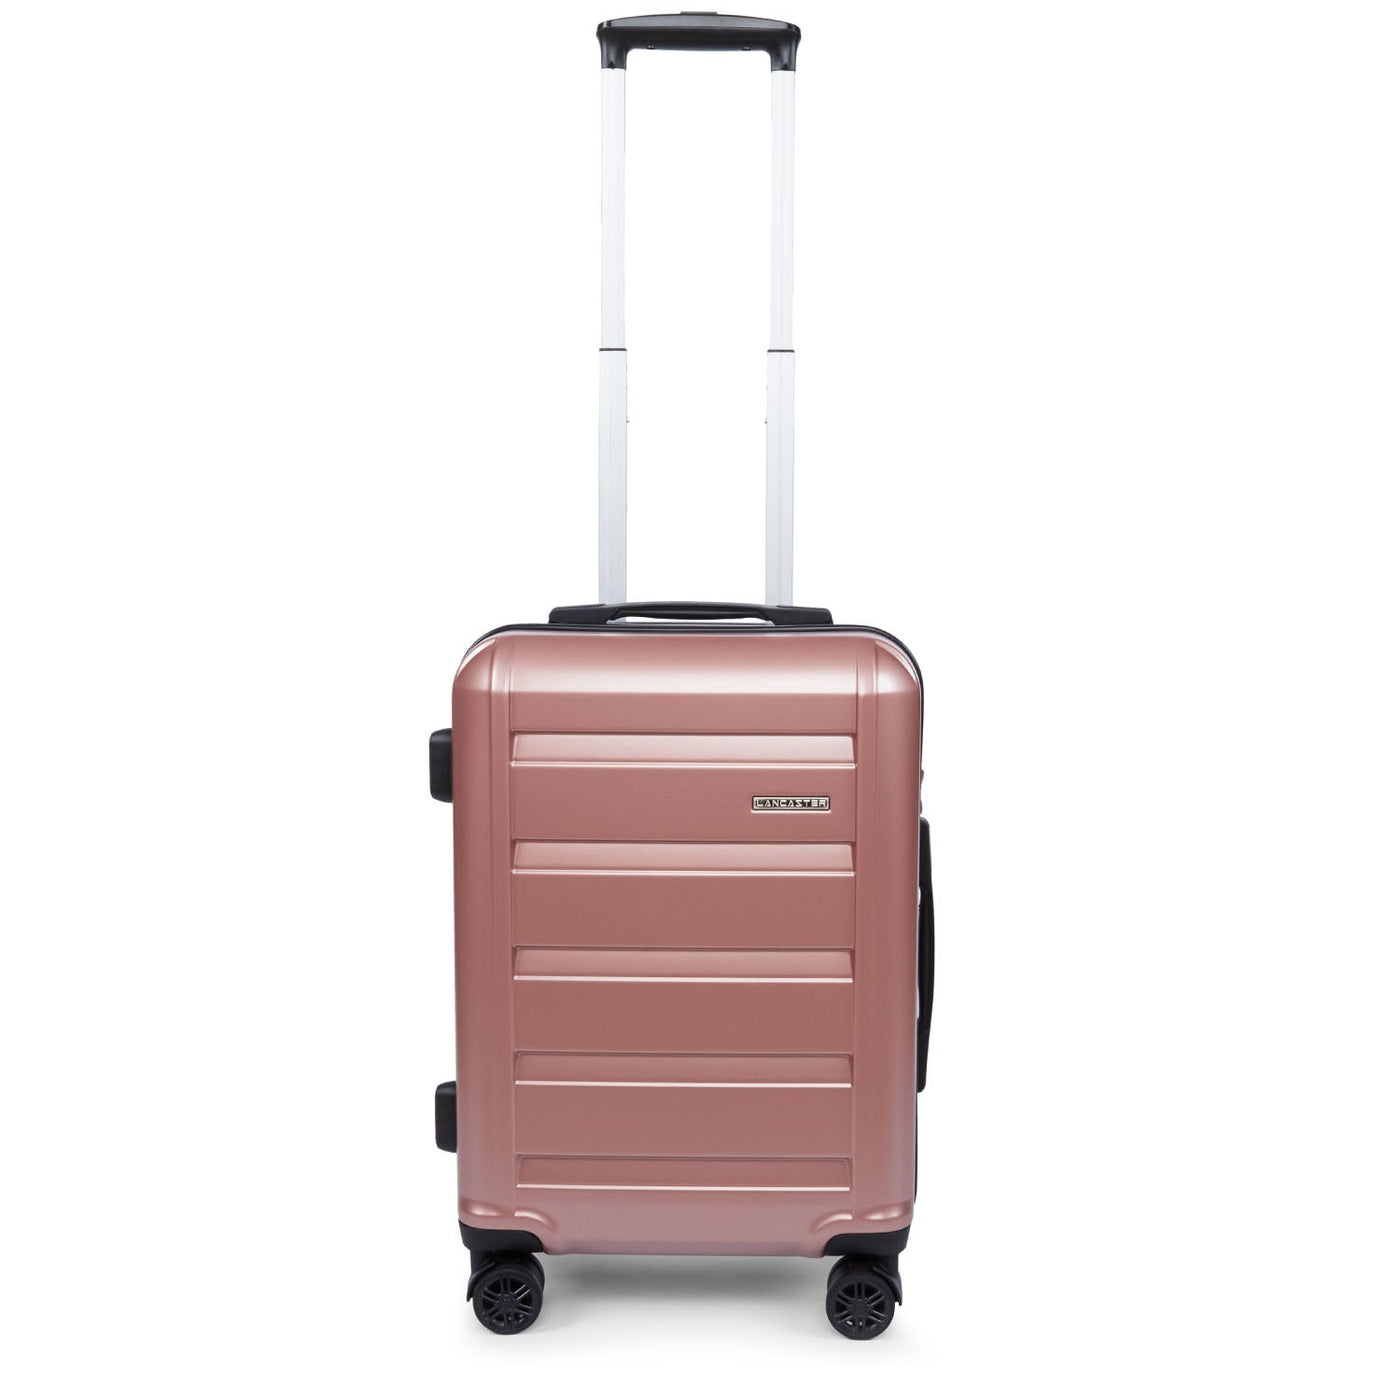 cabin luggage - luggage #couleur_or-rose